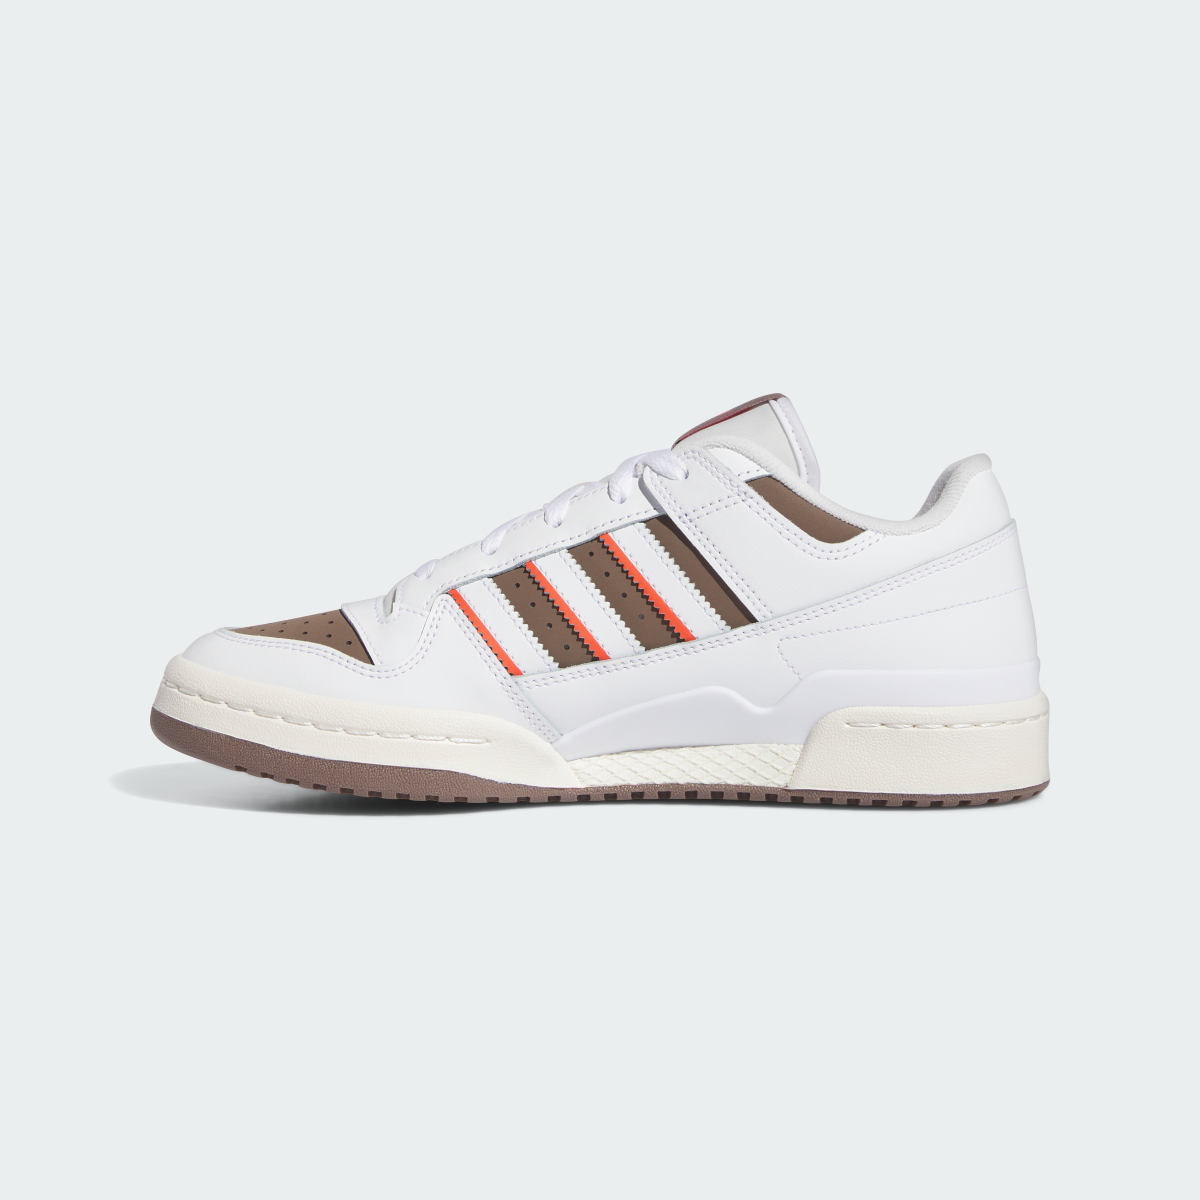 Adidas Forum Low CL Basketball Shoes. 7